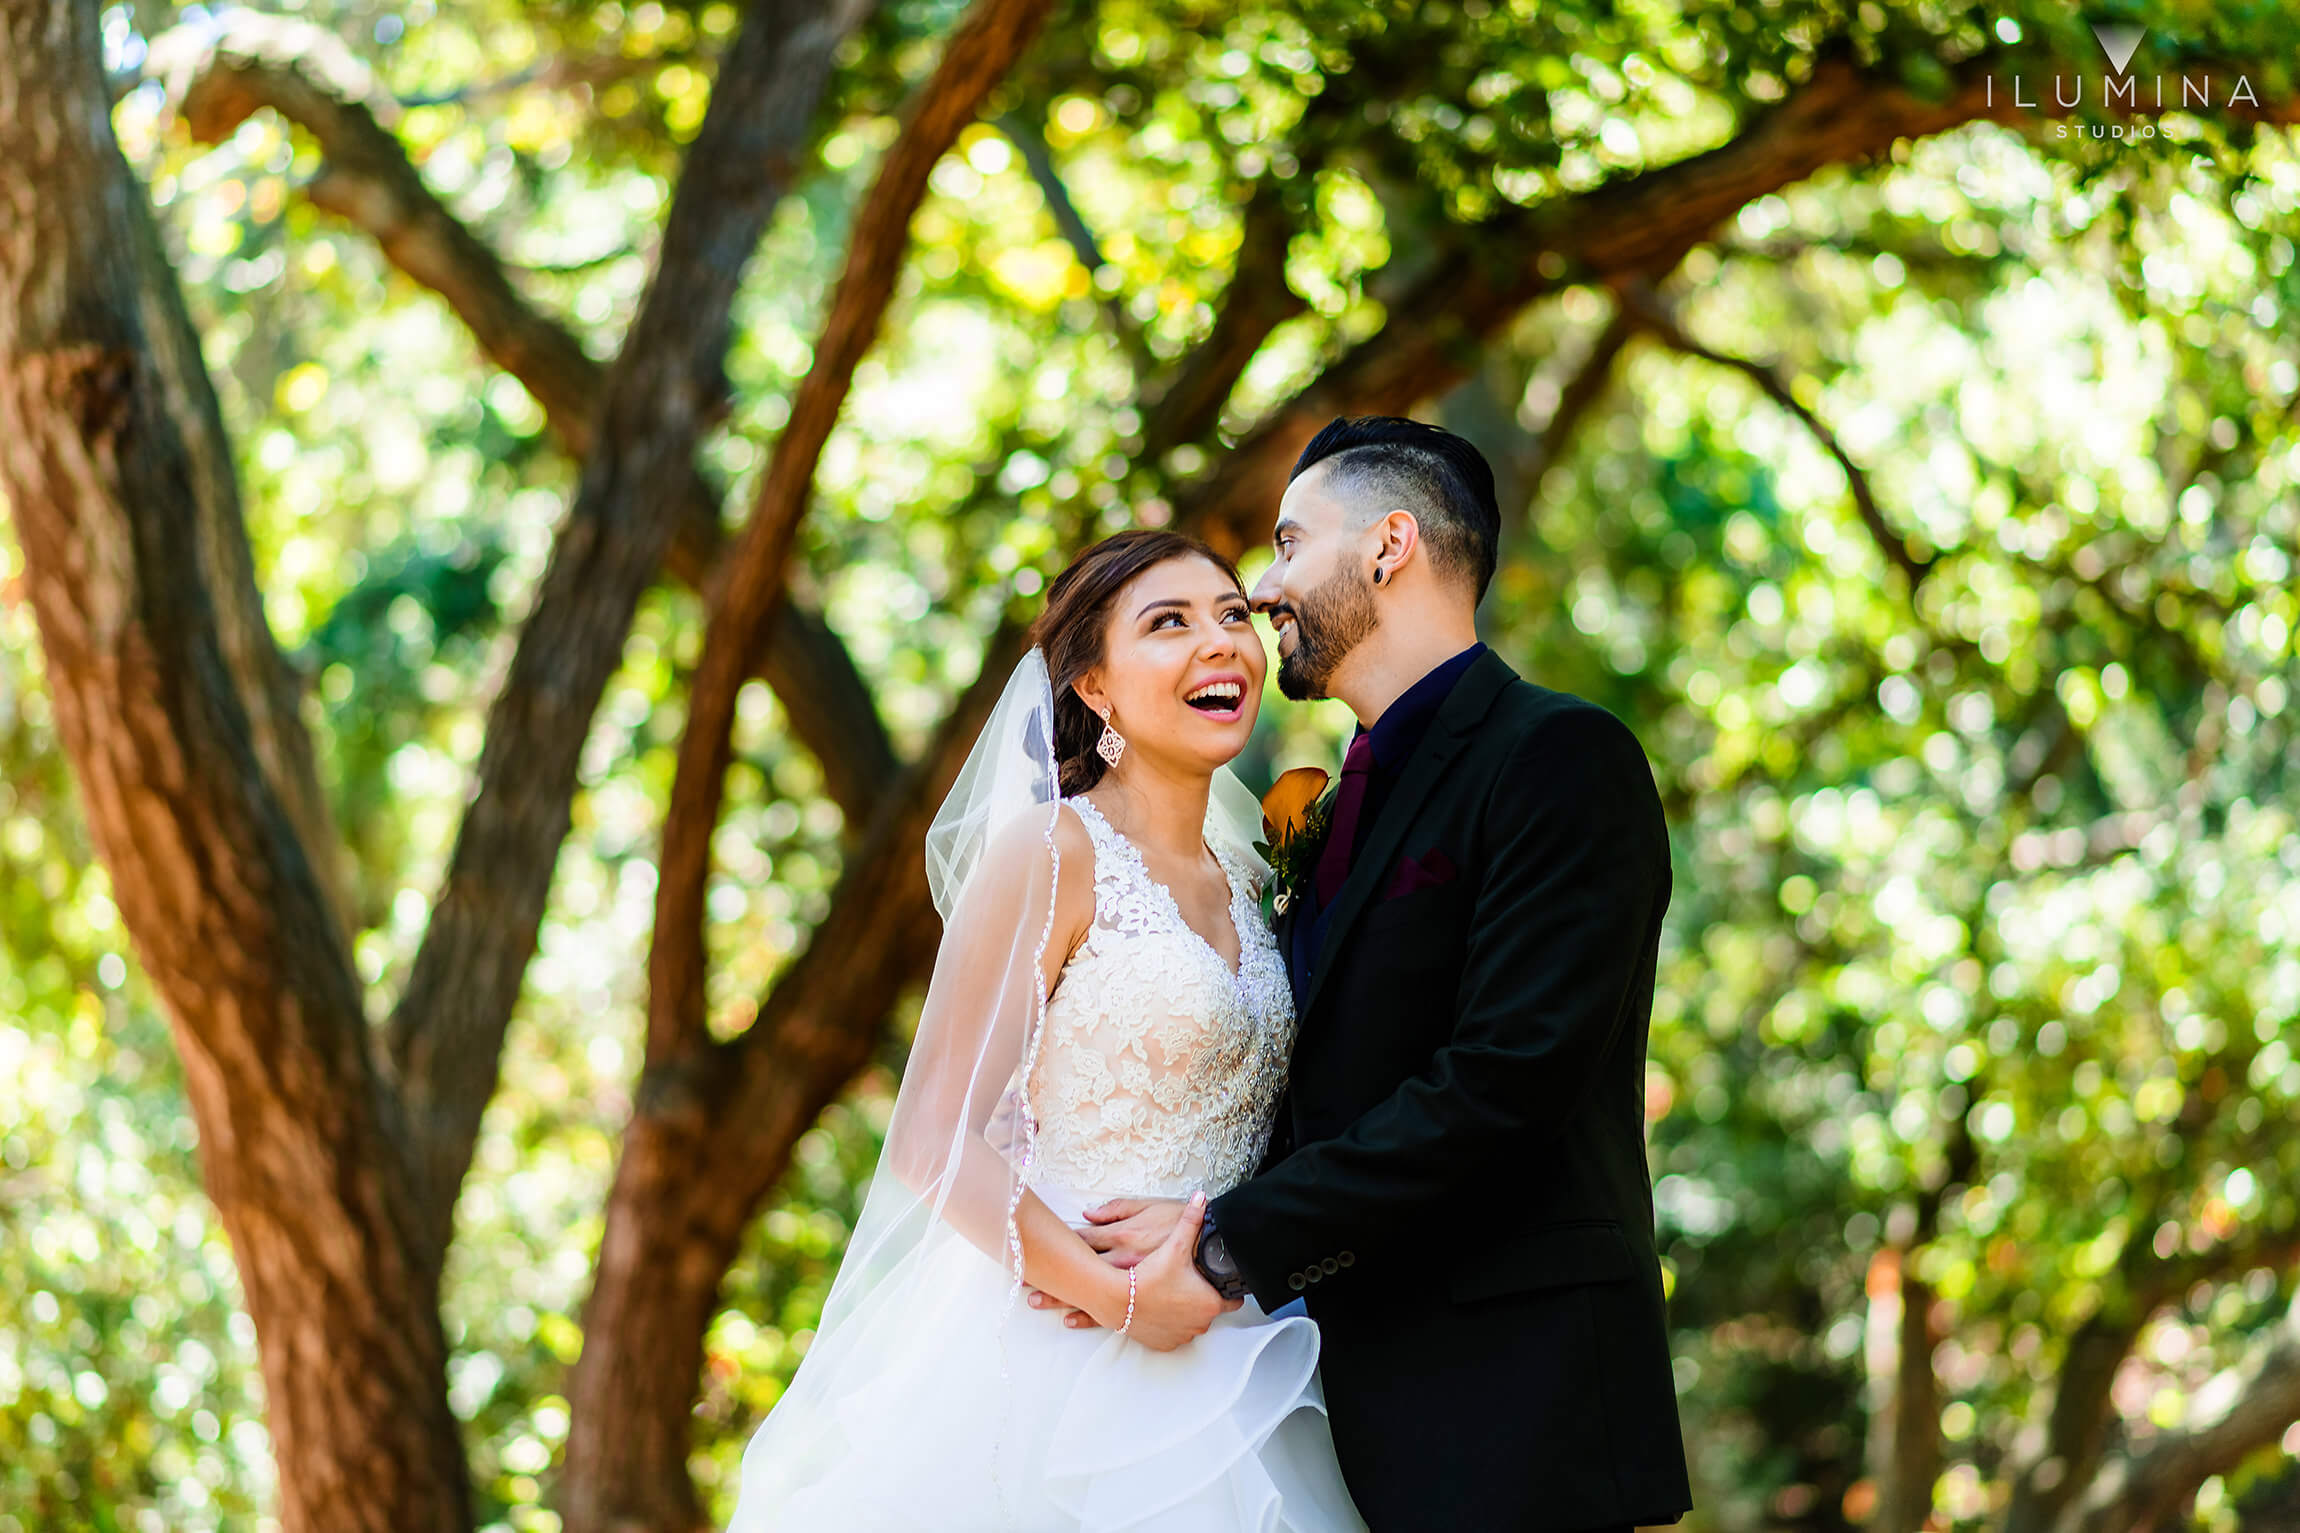 Bride smiles as groom whispers something in her ear with trees in background at Anaheim Oak Canyon Nature Center wedding shoot